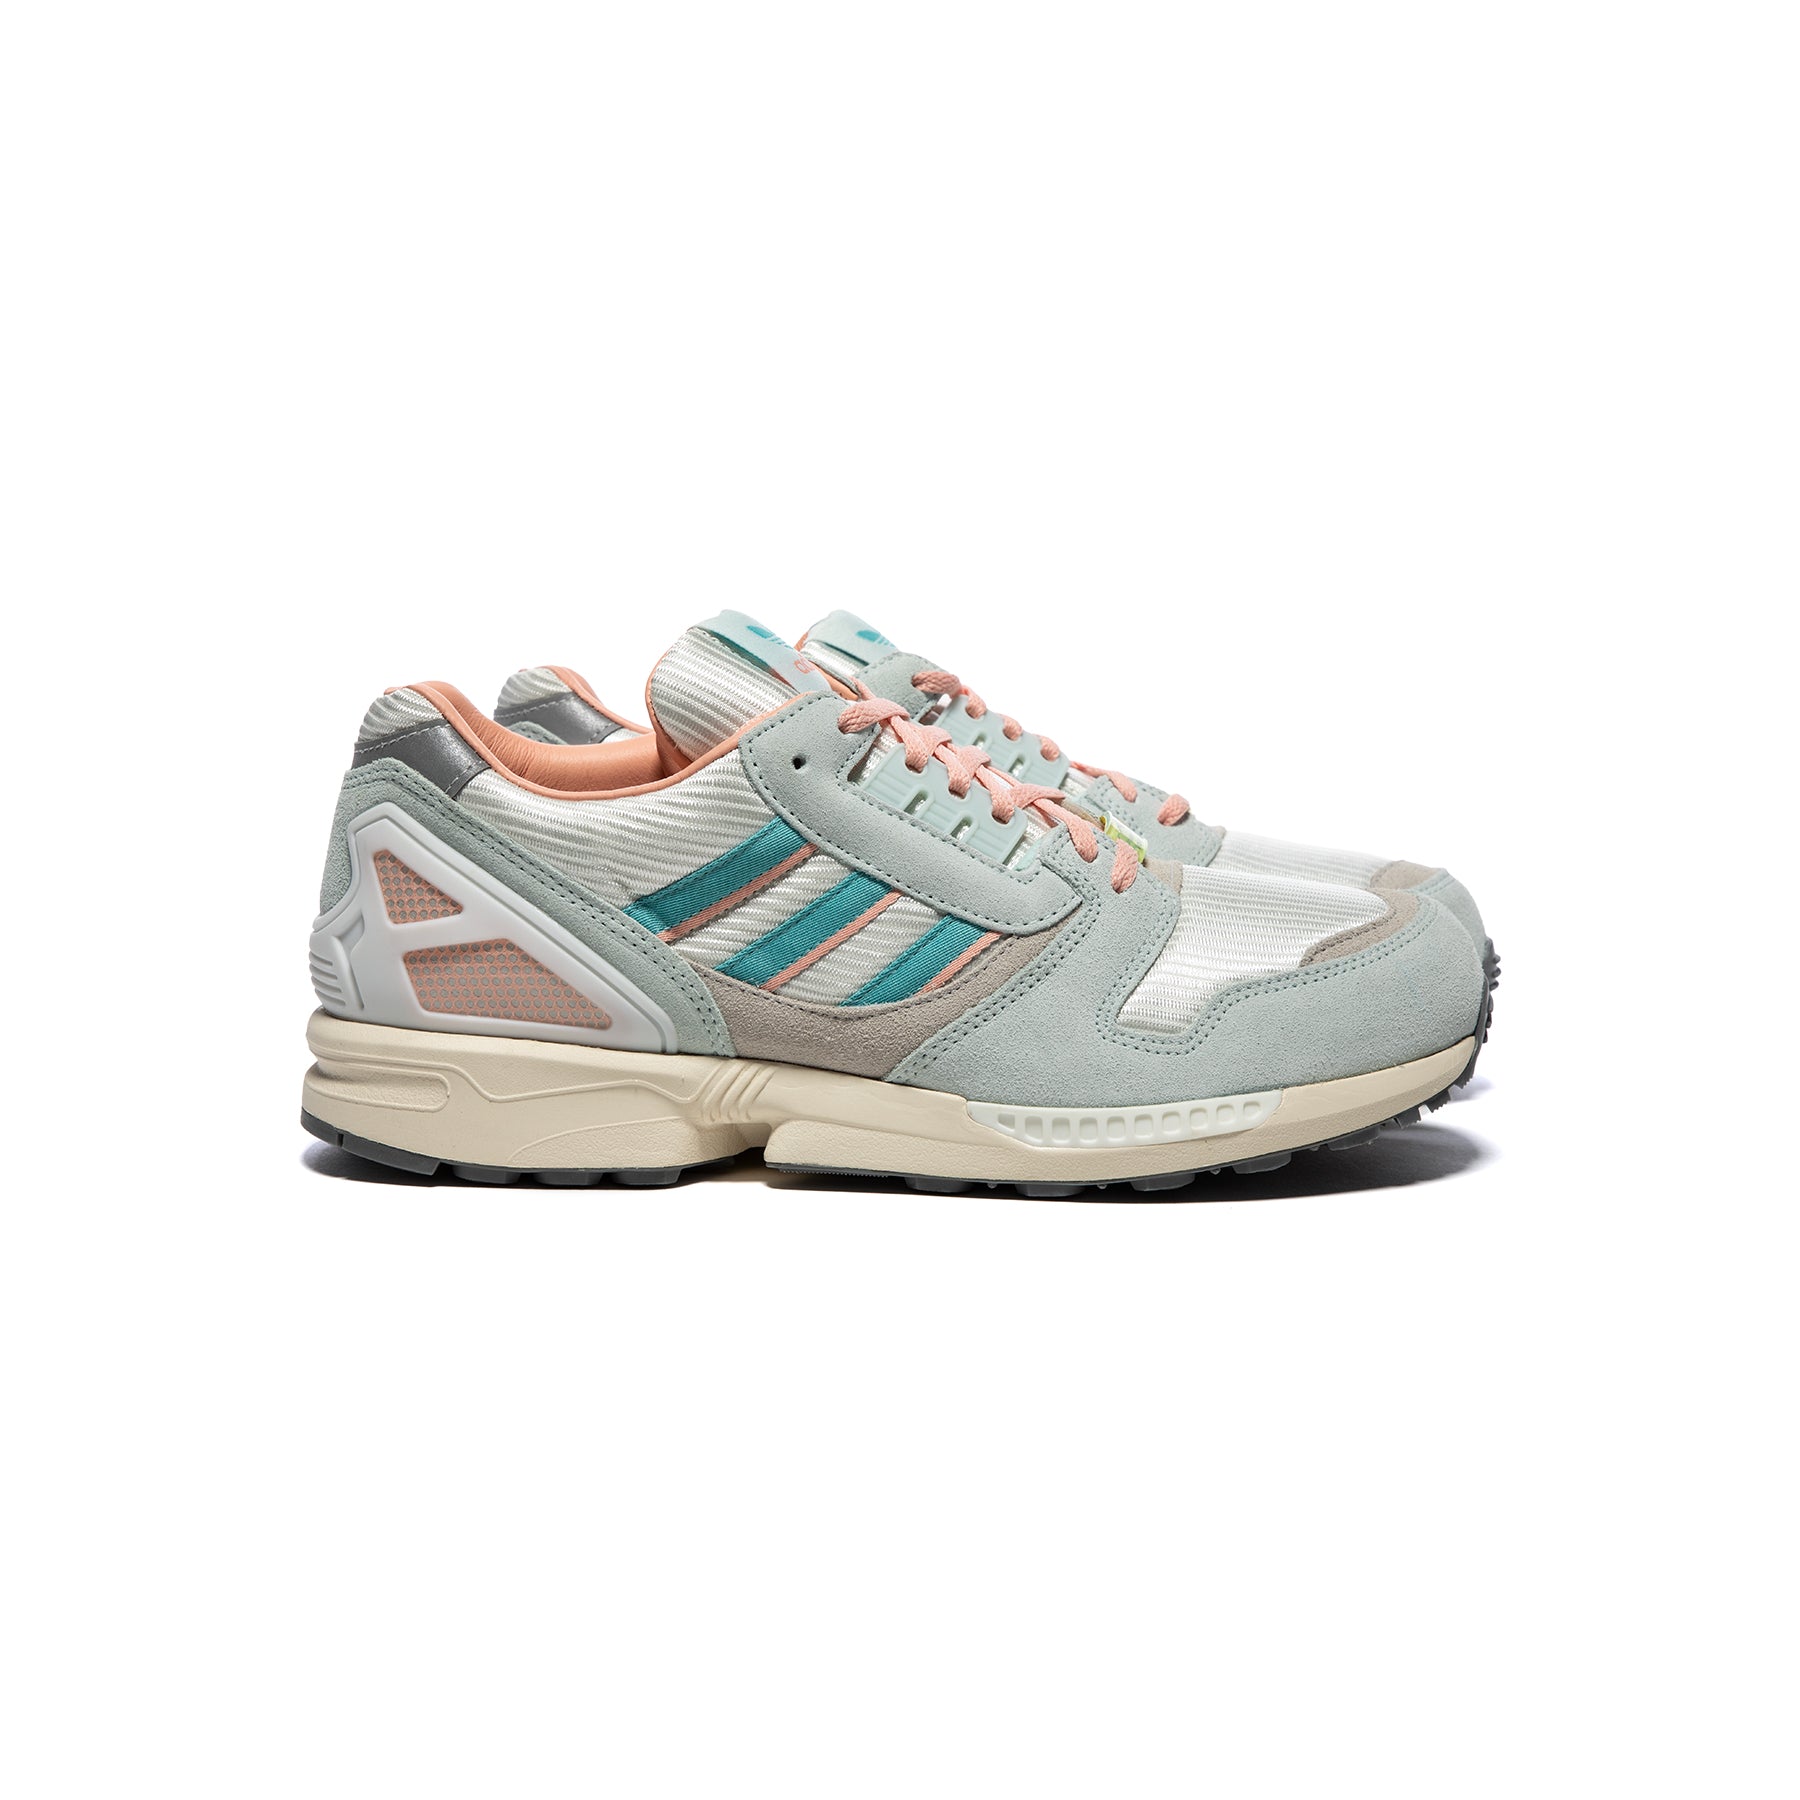 adidas 8000 (Ice Mint/White) – Concepts